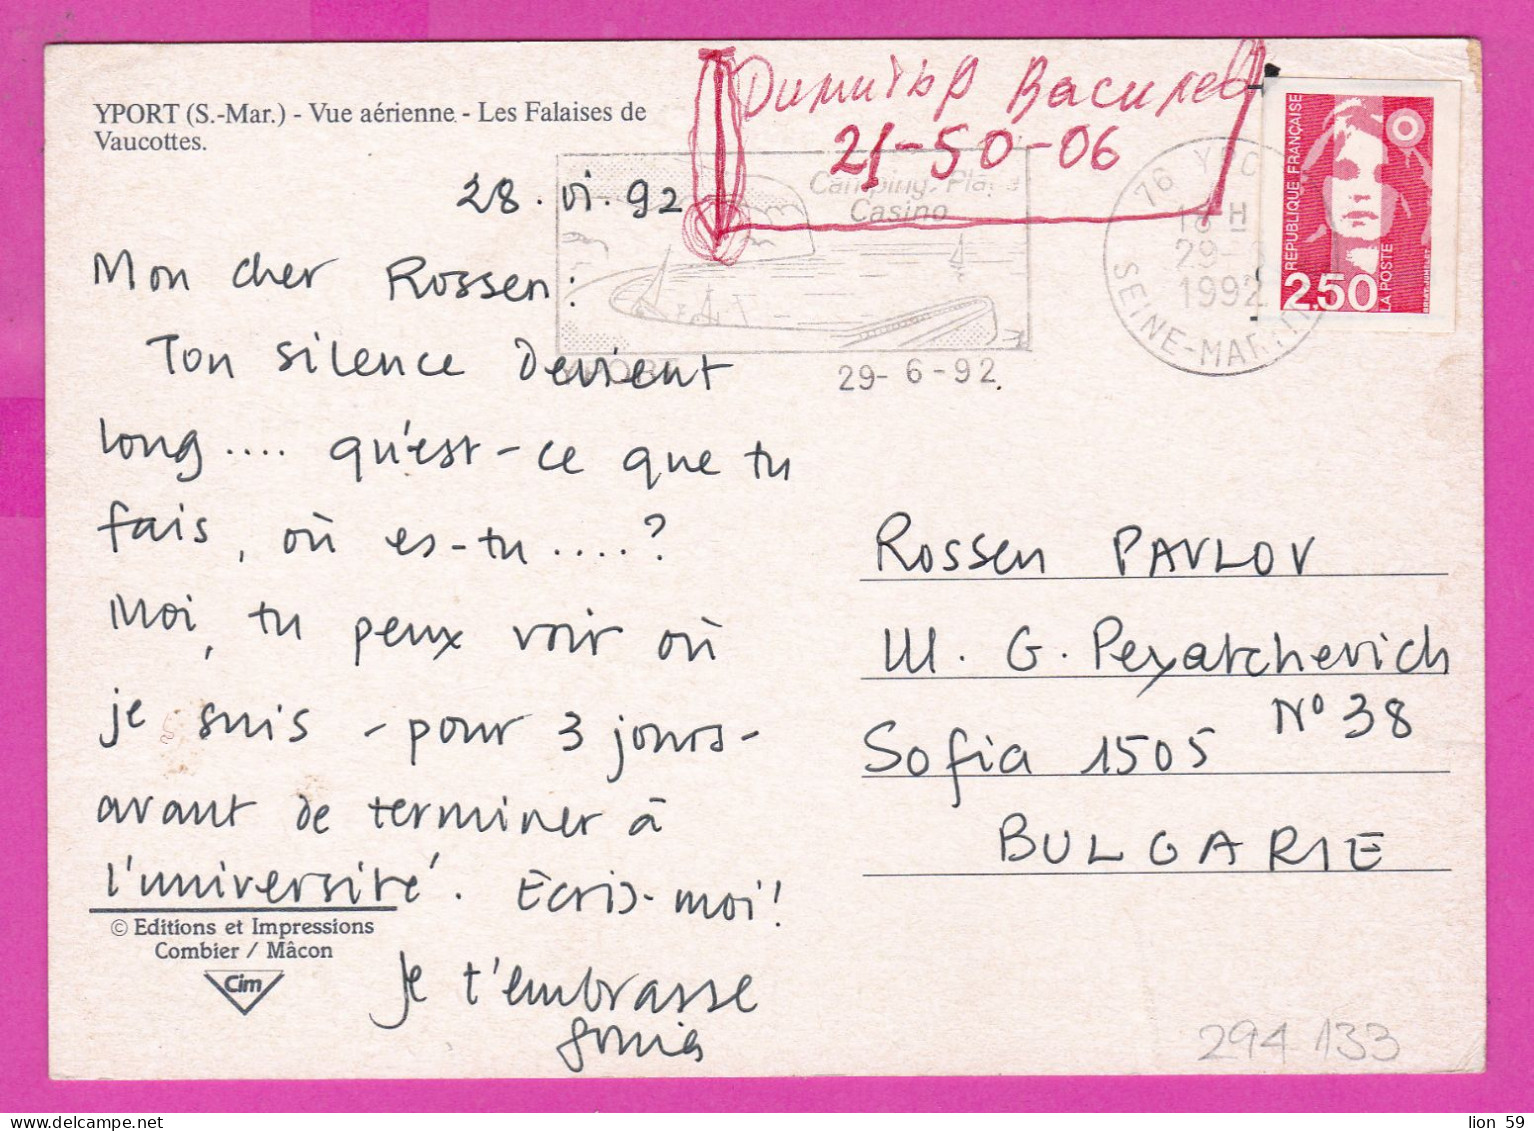 294133 / France - YPORT (S.-Mar.)  PC 1992 USED 2.50 Fr. Marianne De Briat Flamme Camping - Plaje - Casino YPORT - Lettres & Documents